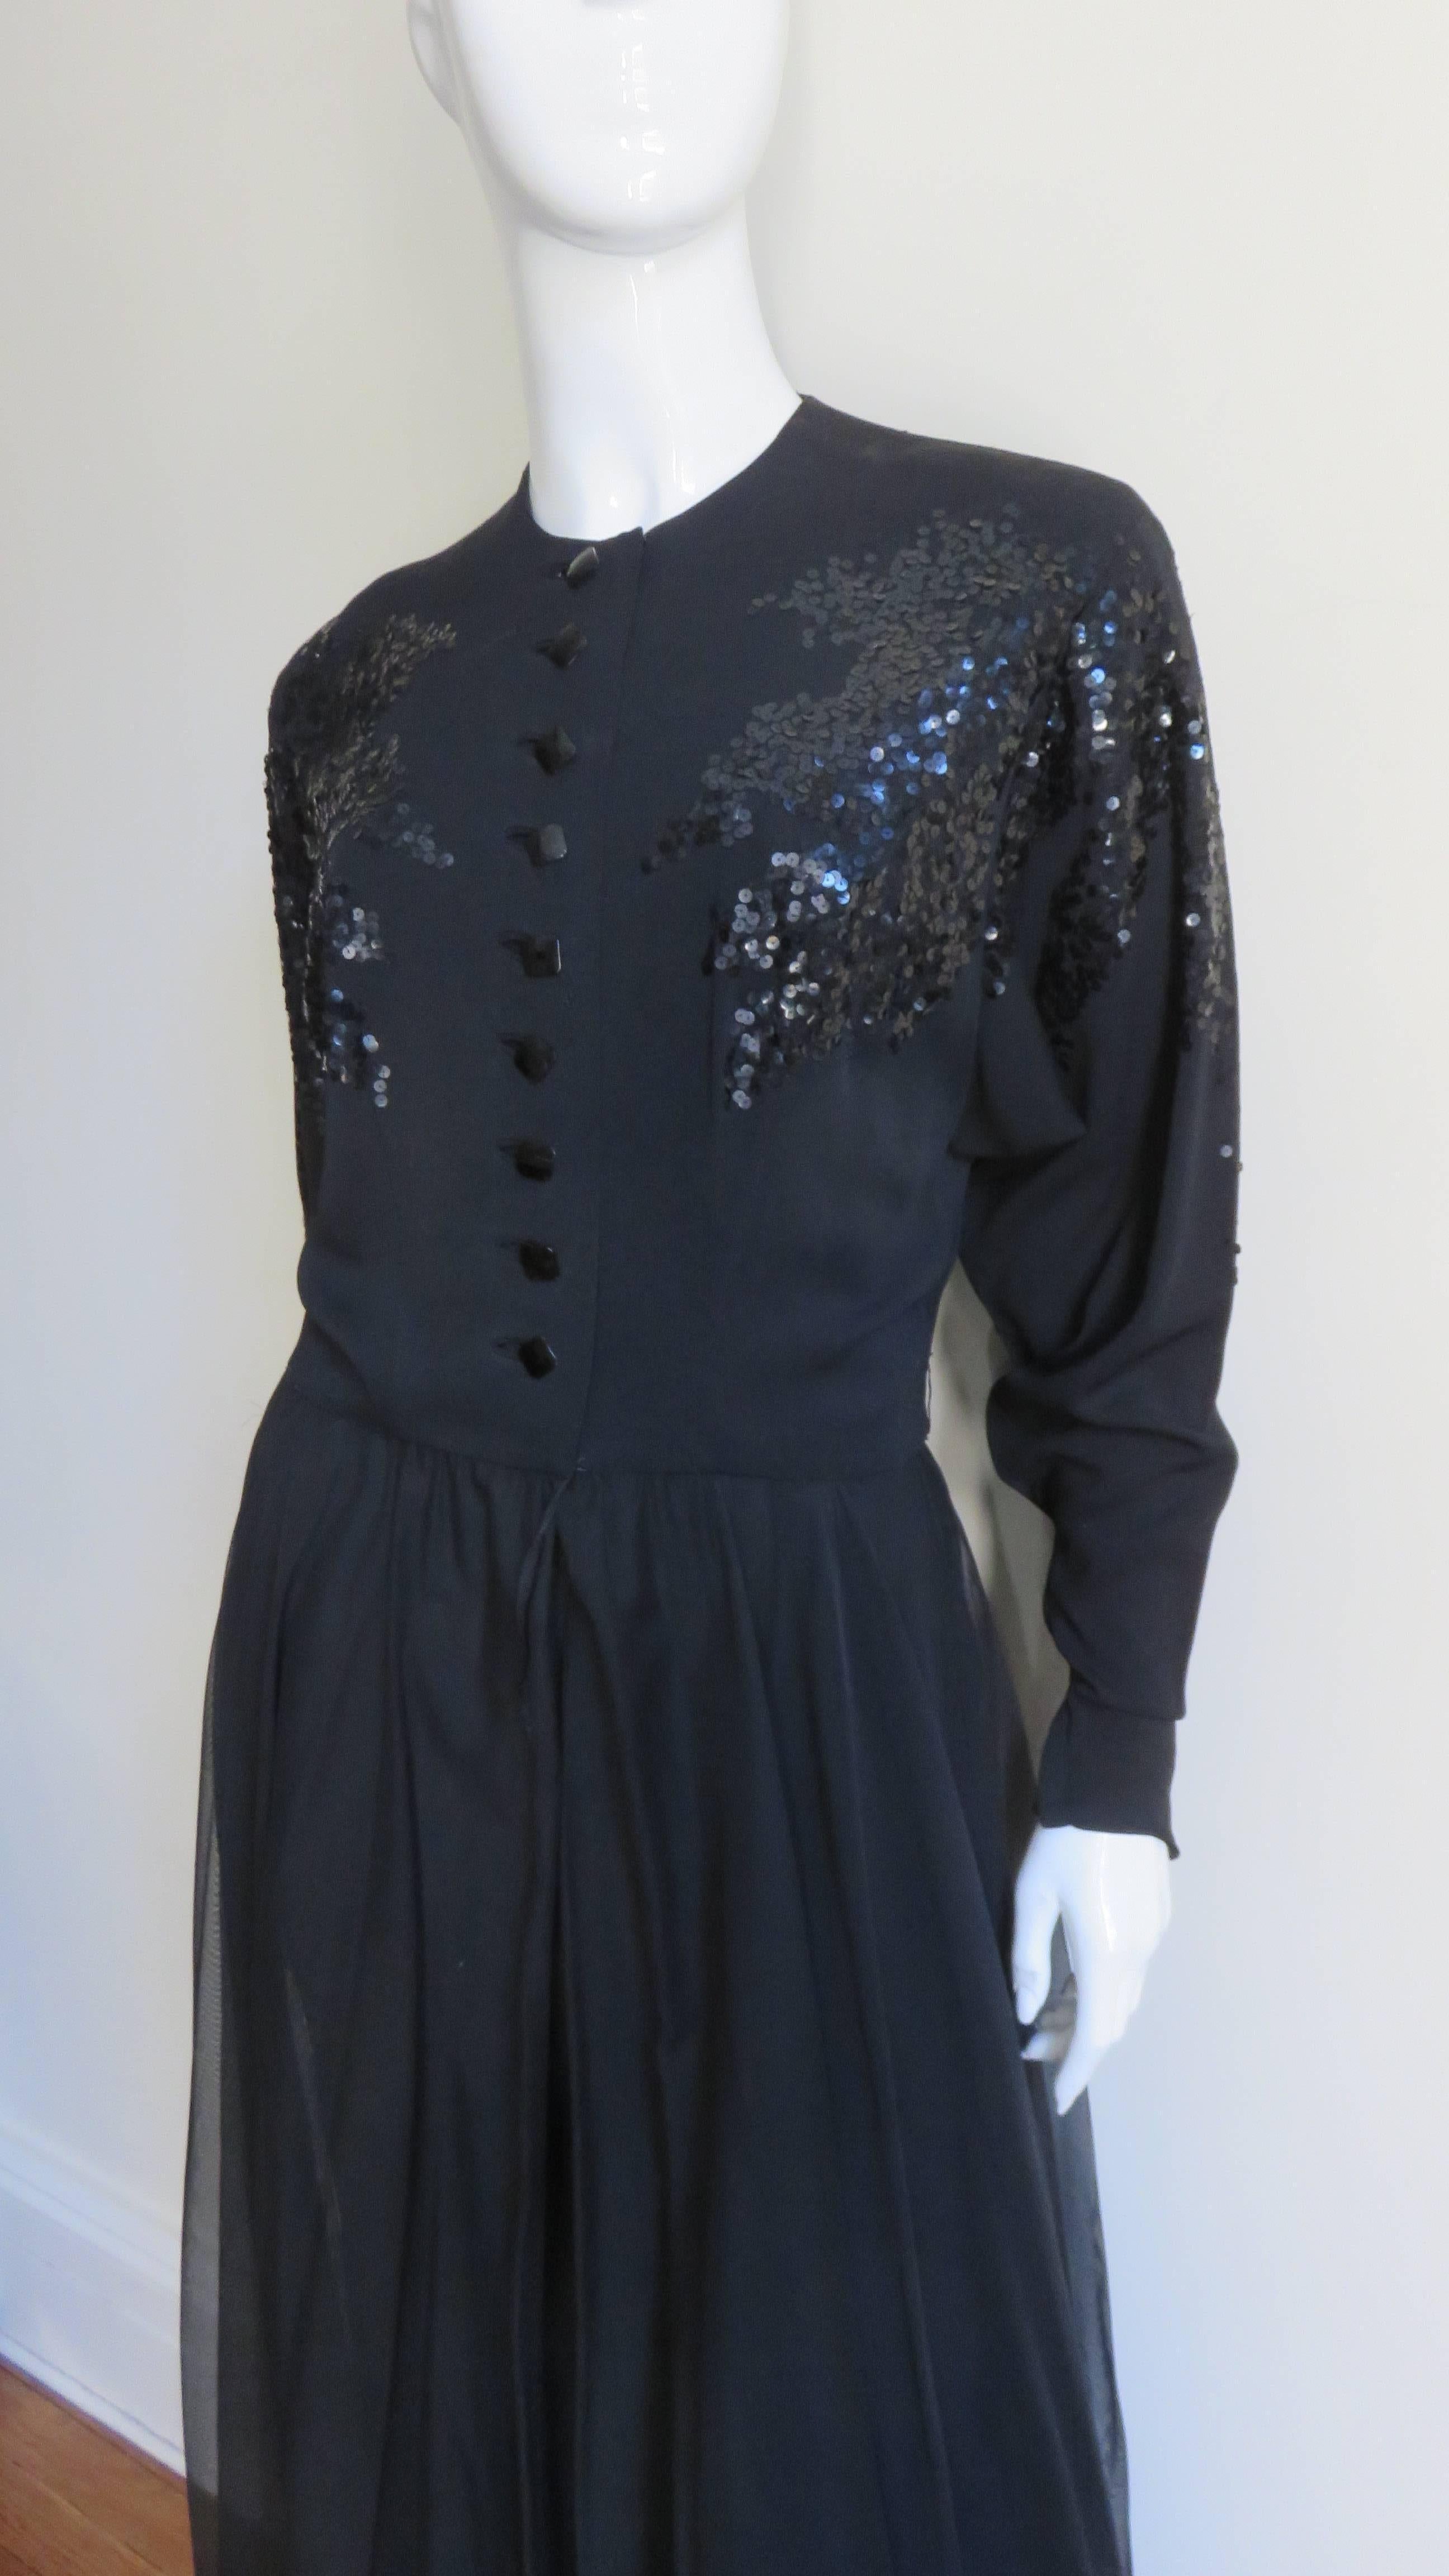 A fabulous hostess set from the 1950s consisting of black pants and an overdress.  The overdress has dolman sleeves with metal zipper cuffs, an elaborate abstract black sequin pattern along the upper front, back and sleeves and black square faceted